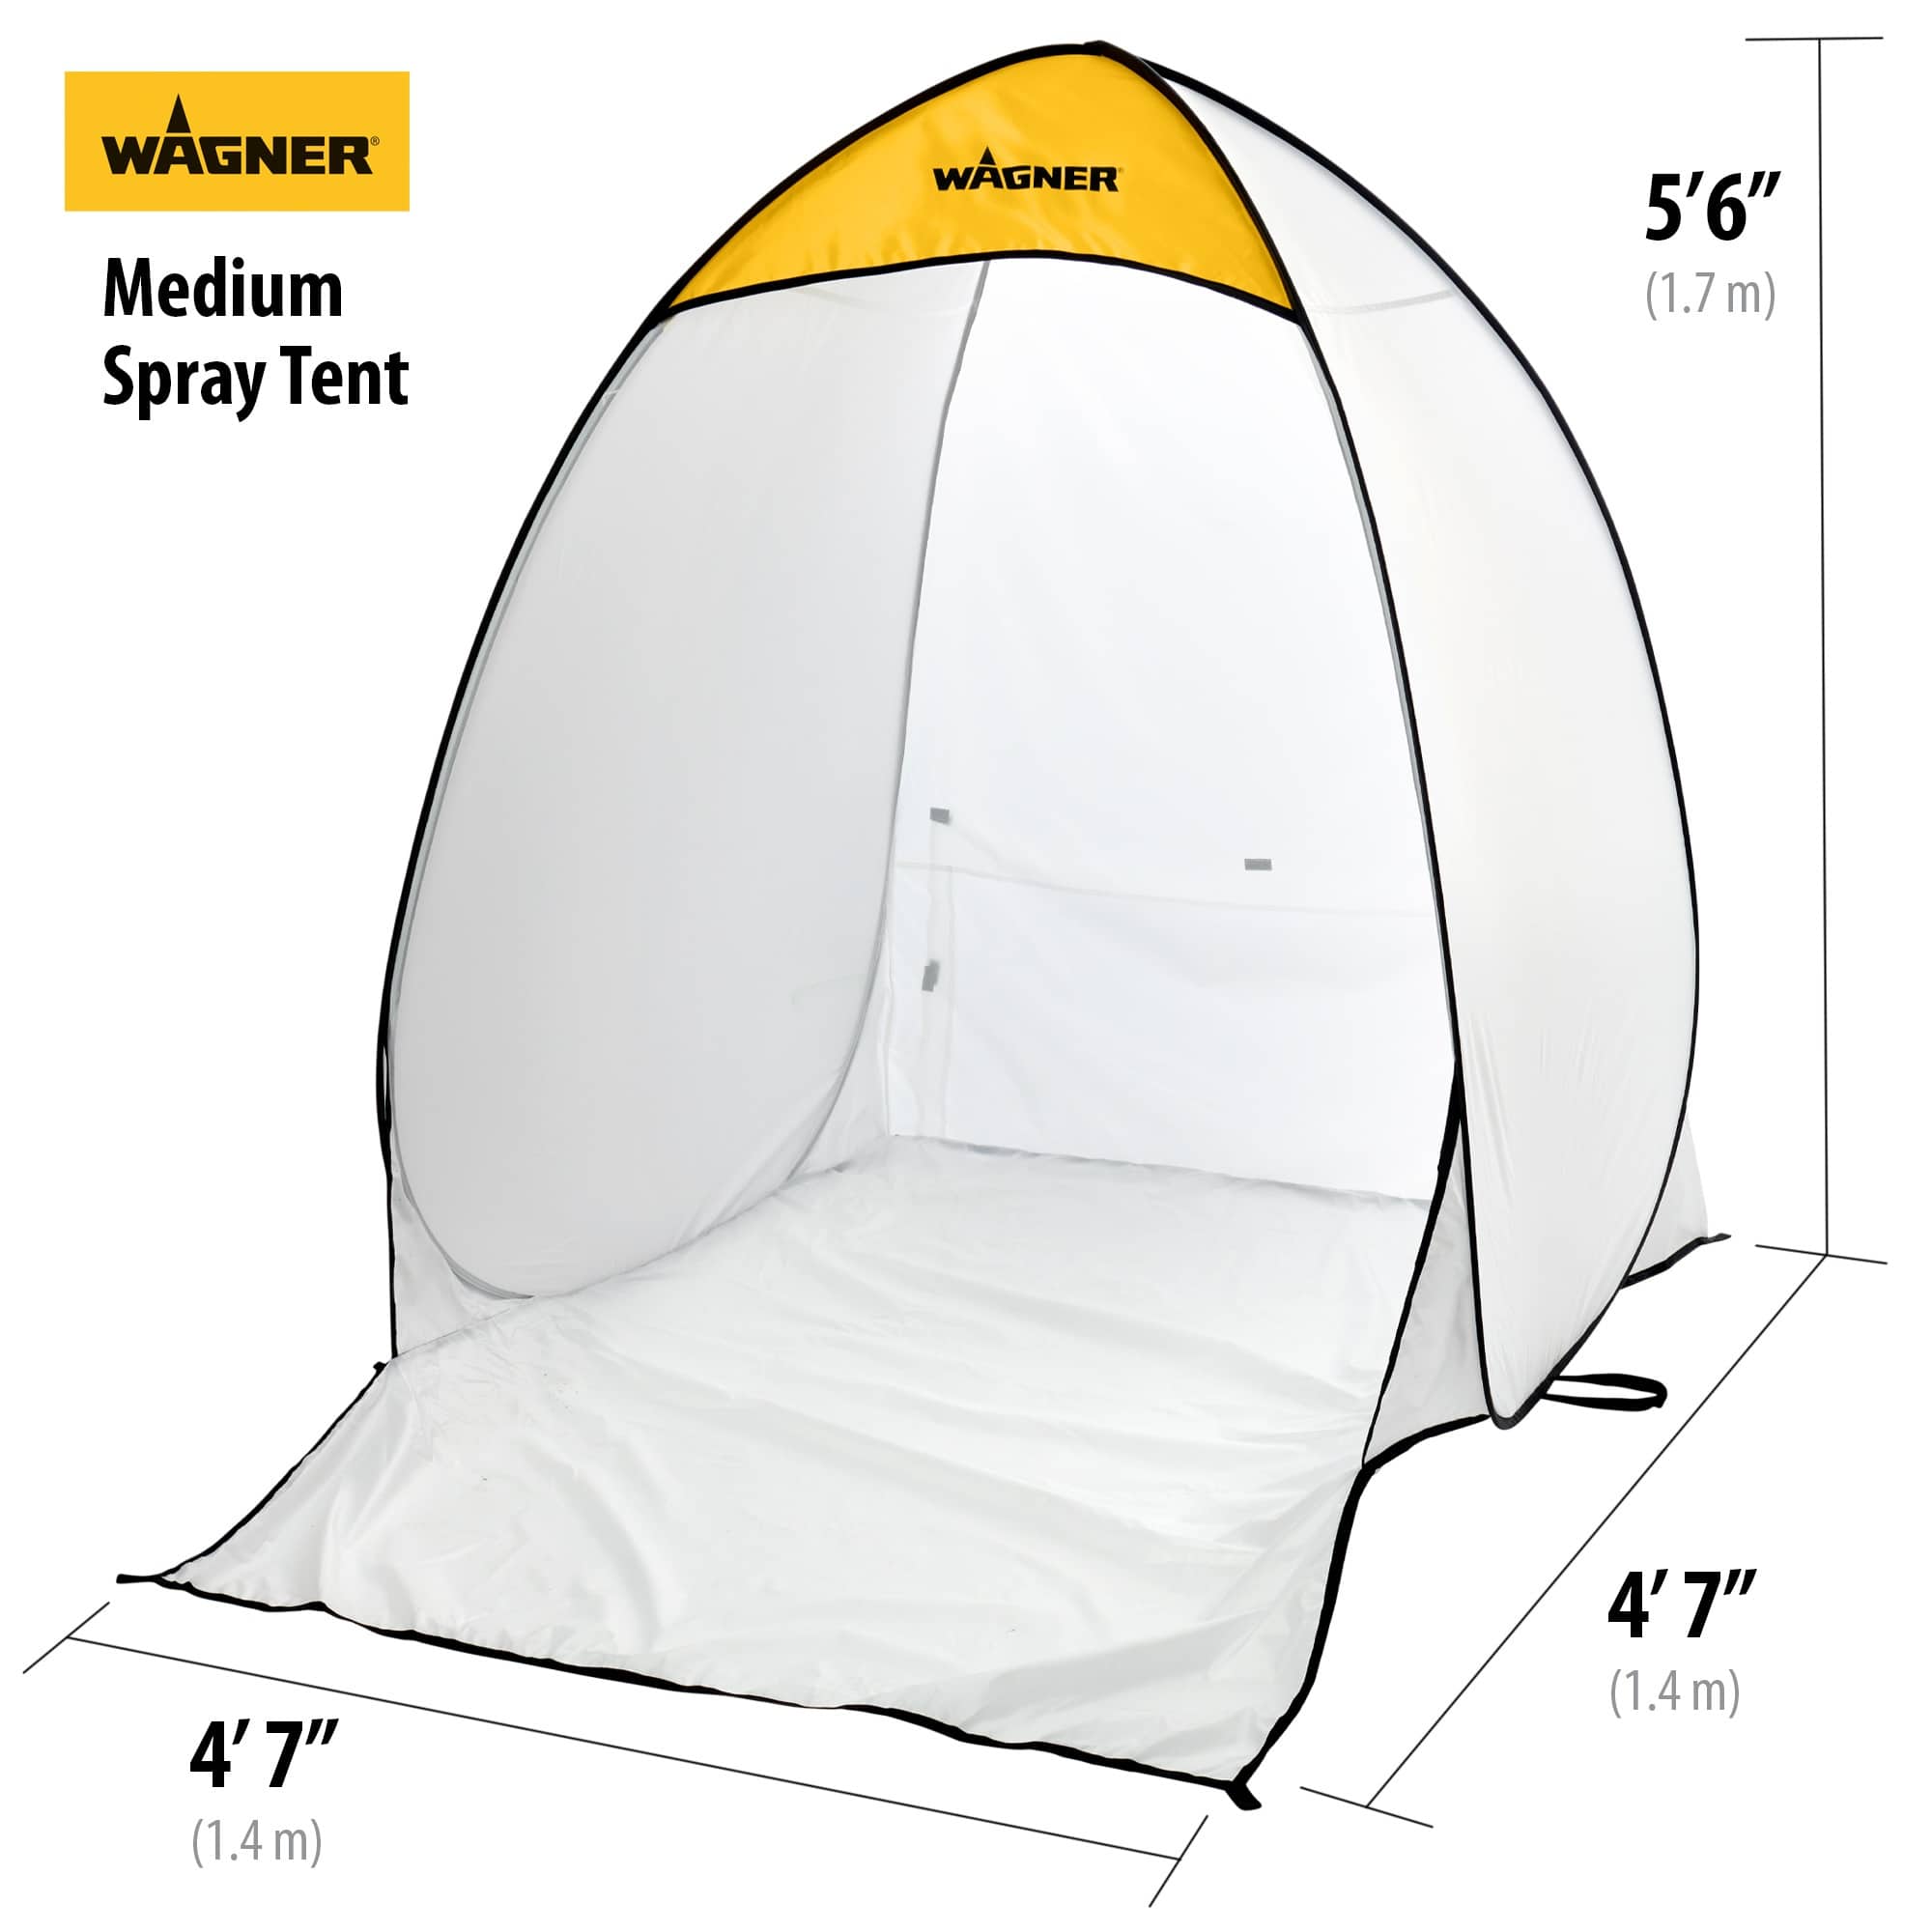 Wagner Spray Tent-0529055 - The Home Depot